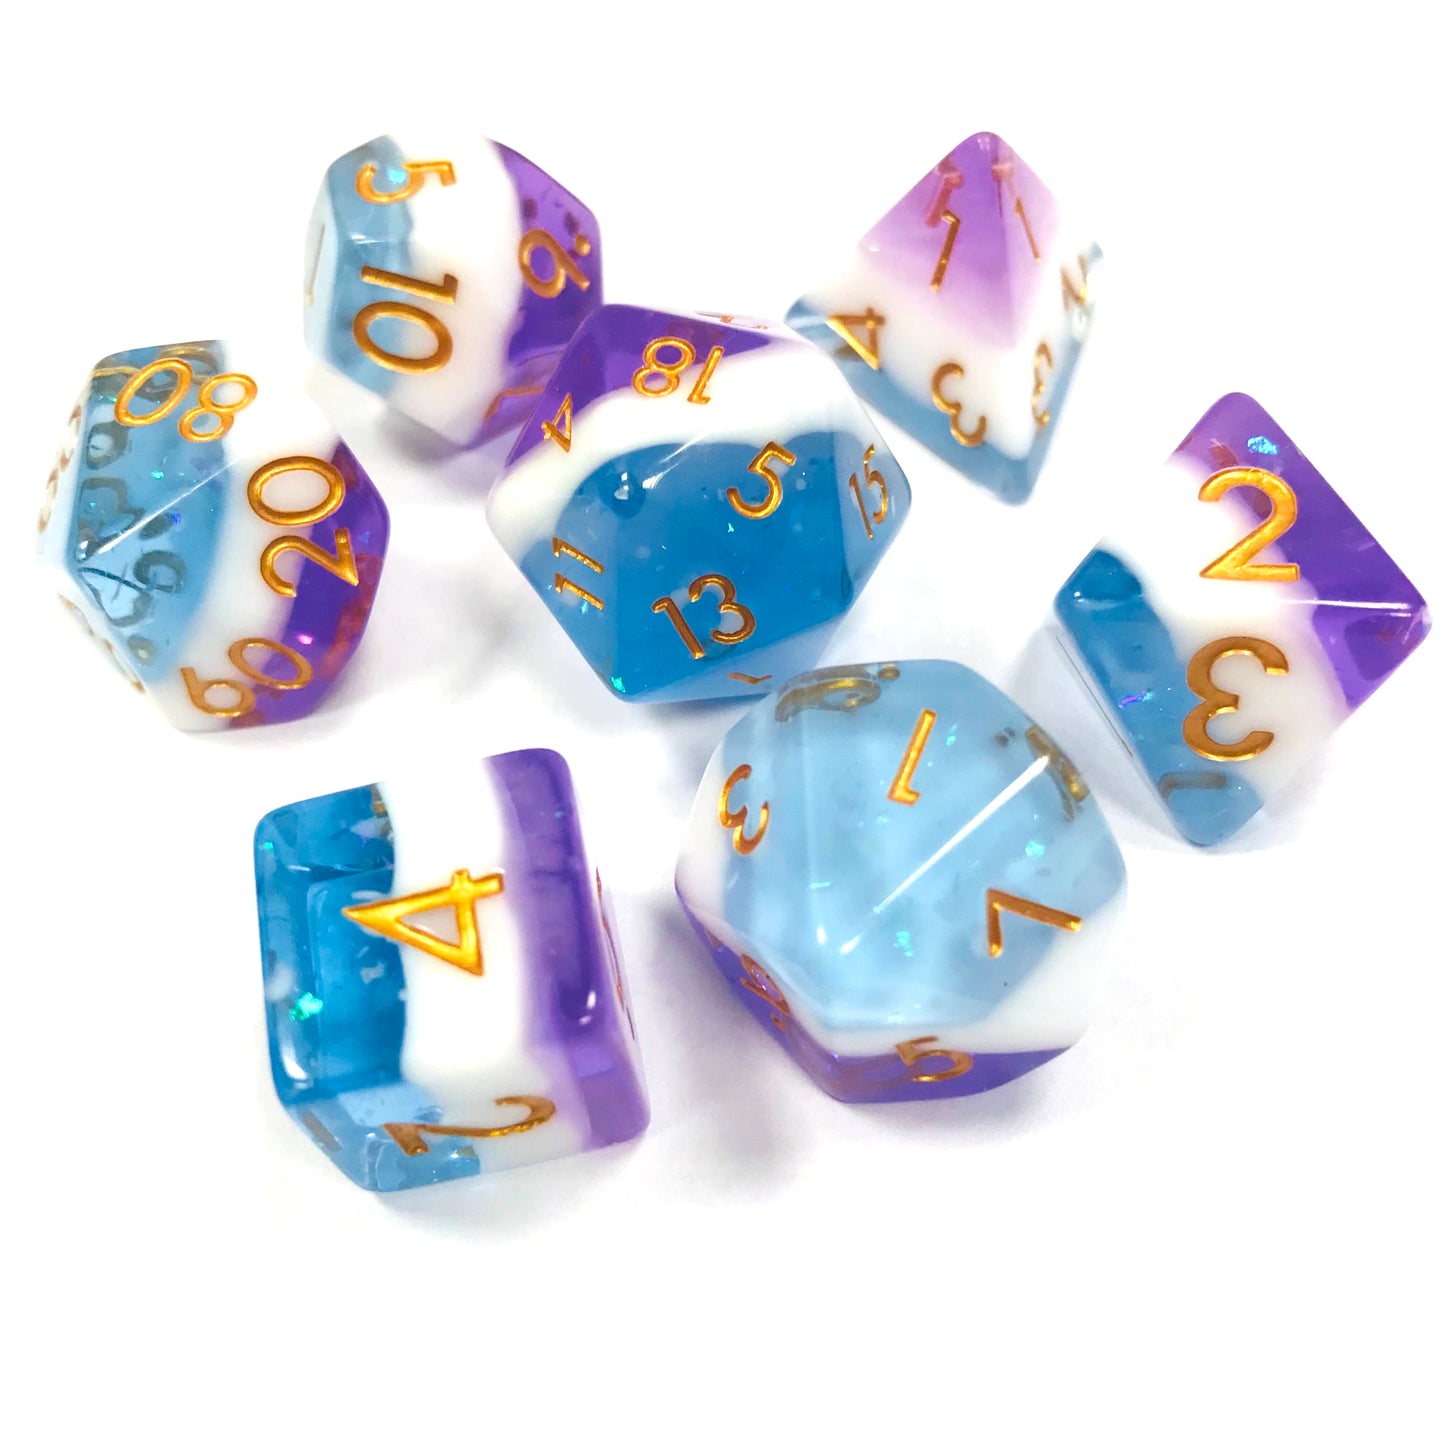 resin frosty dnd dice set for RPG, role playing games, dice goblin, dice dragon and critical critters